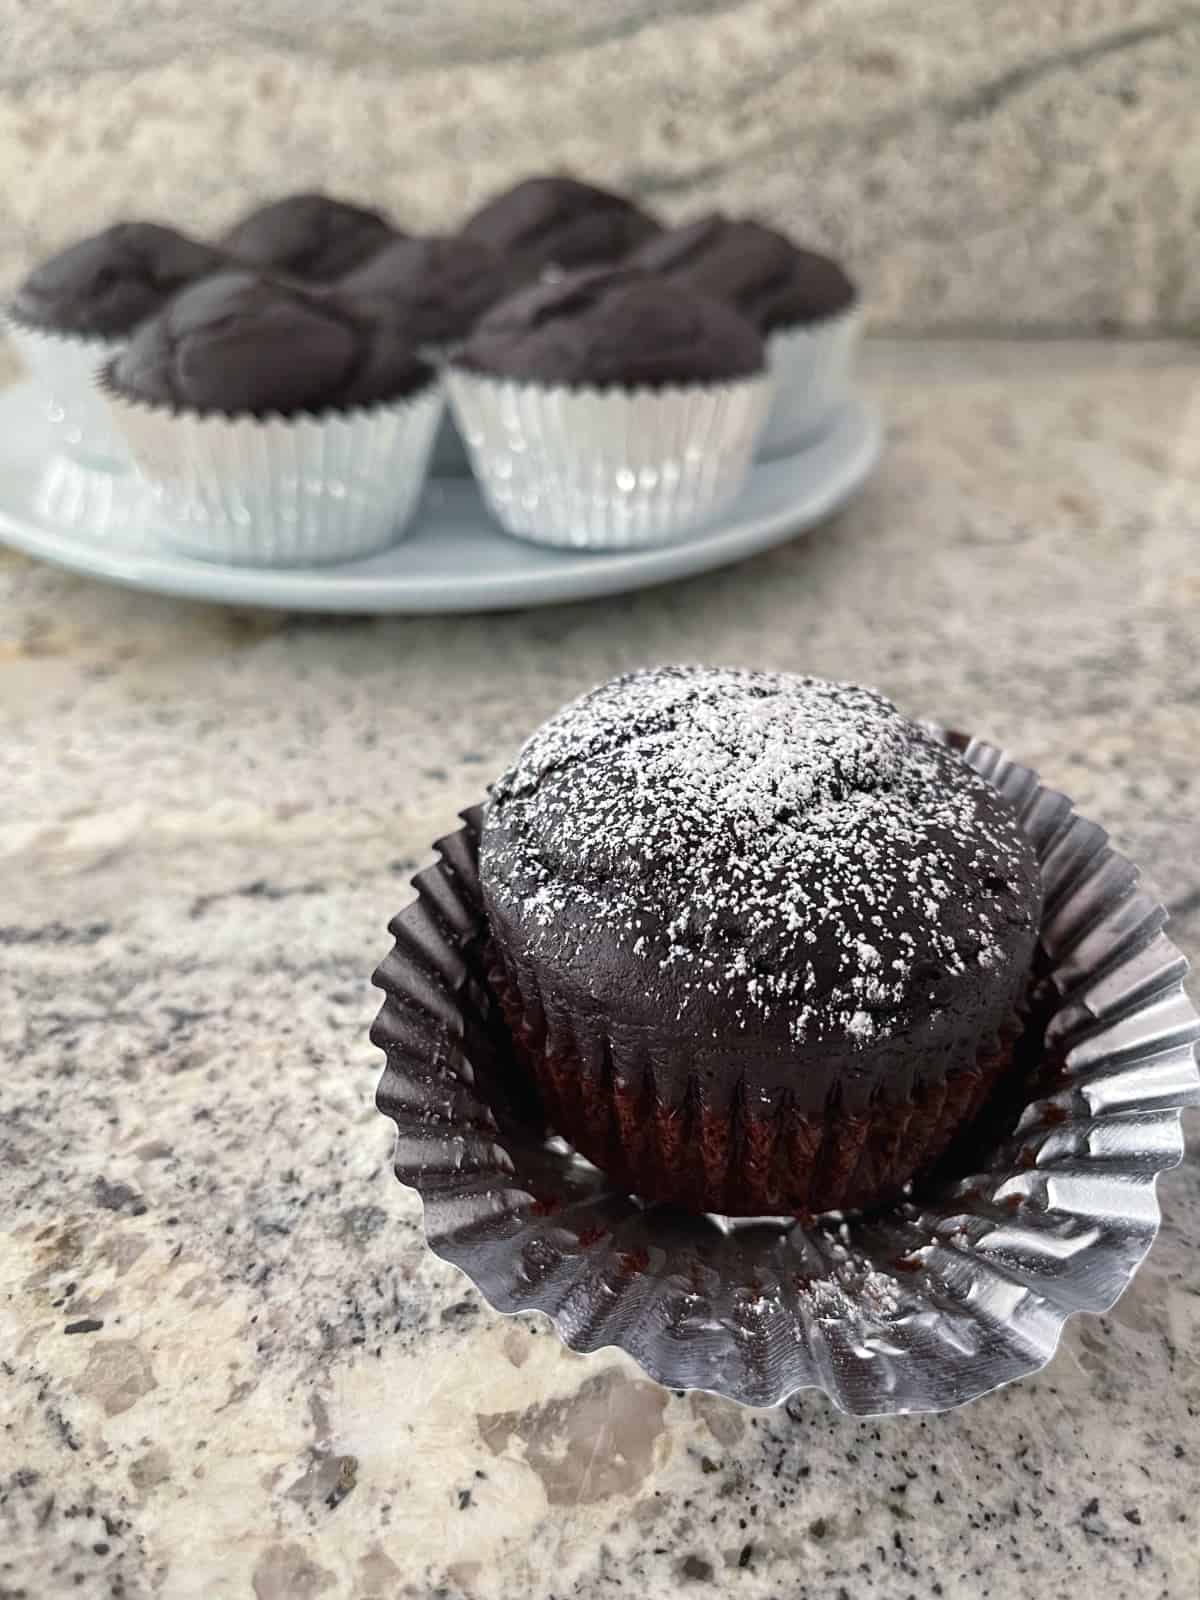 Chocolate cupcake dusted with powdered sugar in front of plate of plain chocolate cupcakes.